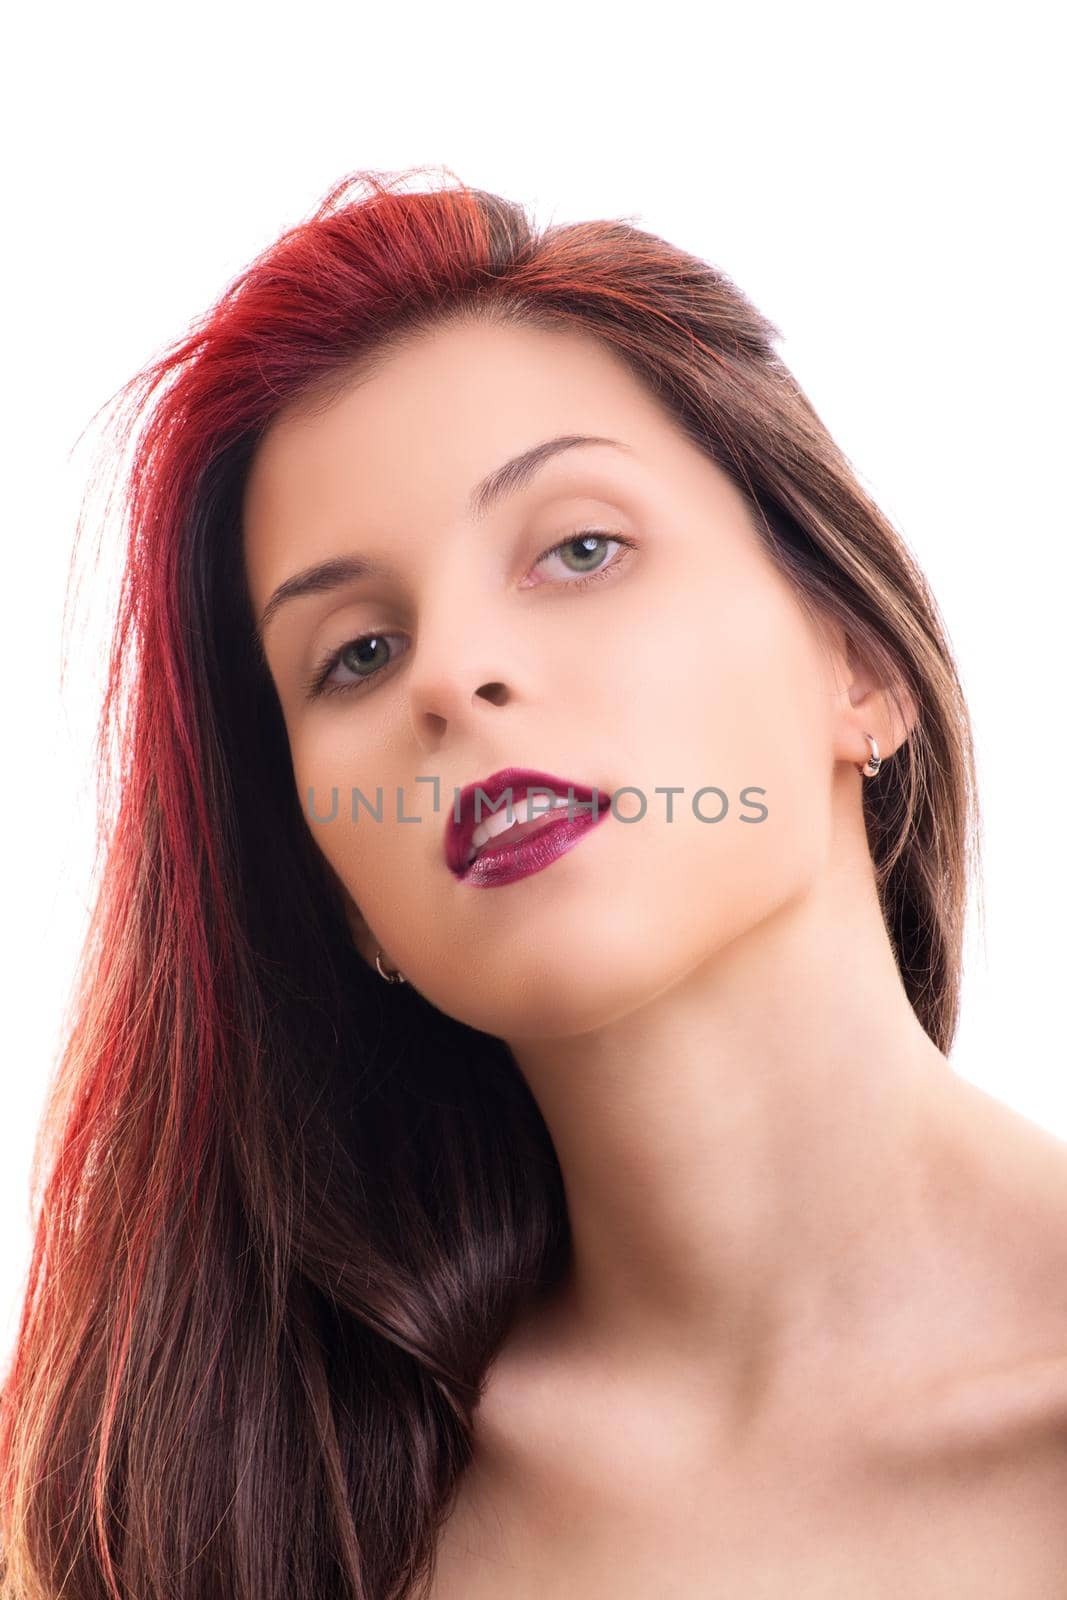 Sensual portrait of a beautiful redhead young woman with soft, clean make up and red lipstick, isolated on white background. Fashion and beauty concept.